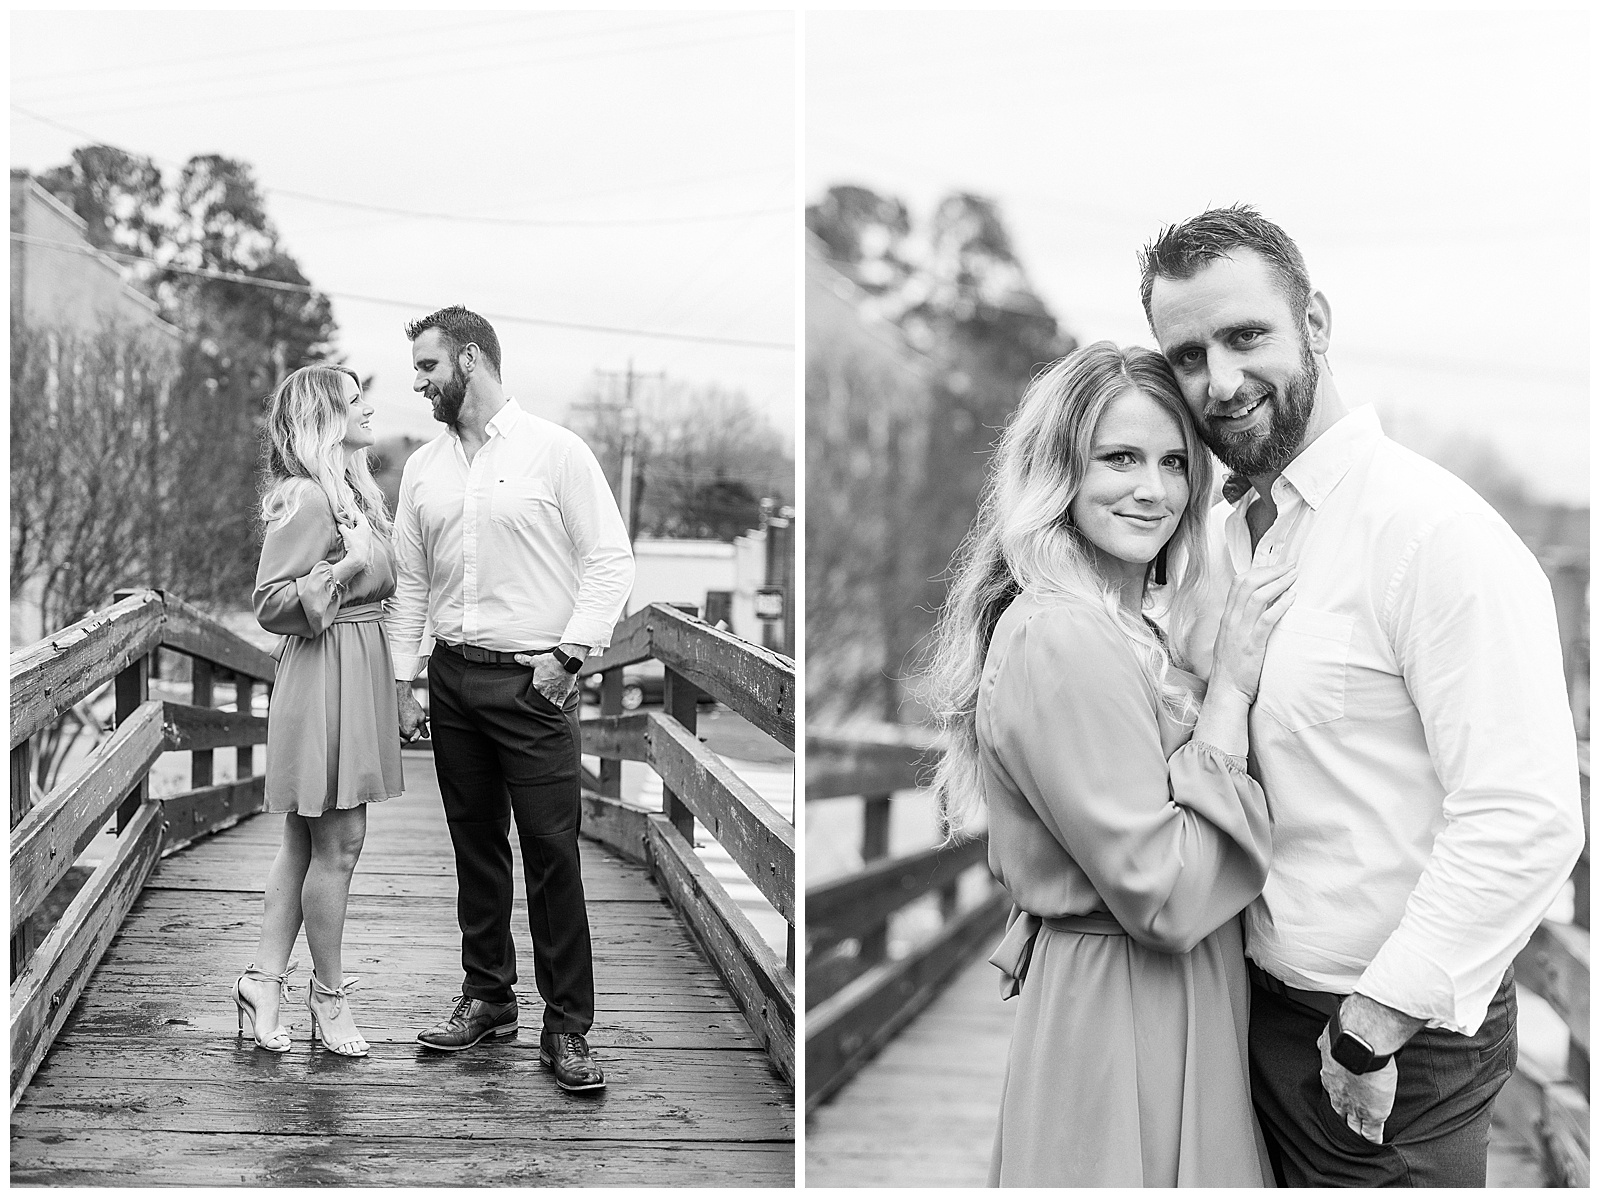 Adorable couple walking across wooden bridge in downtown Waxhaw, NC Engagement Session with Bright Hot Pink Dress Outfit Ideas